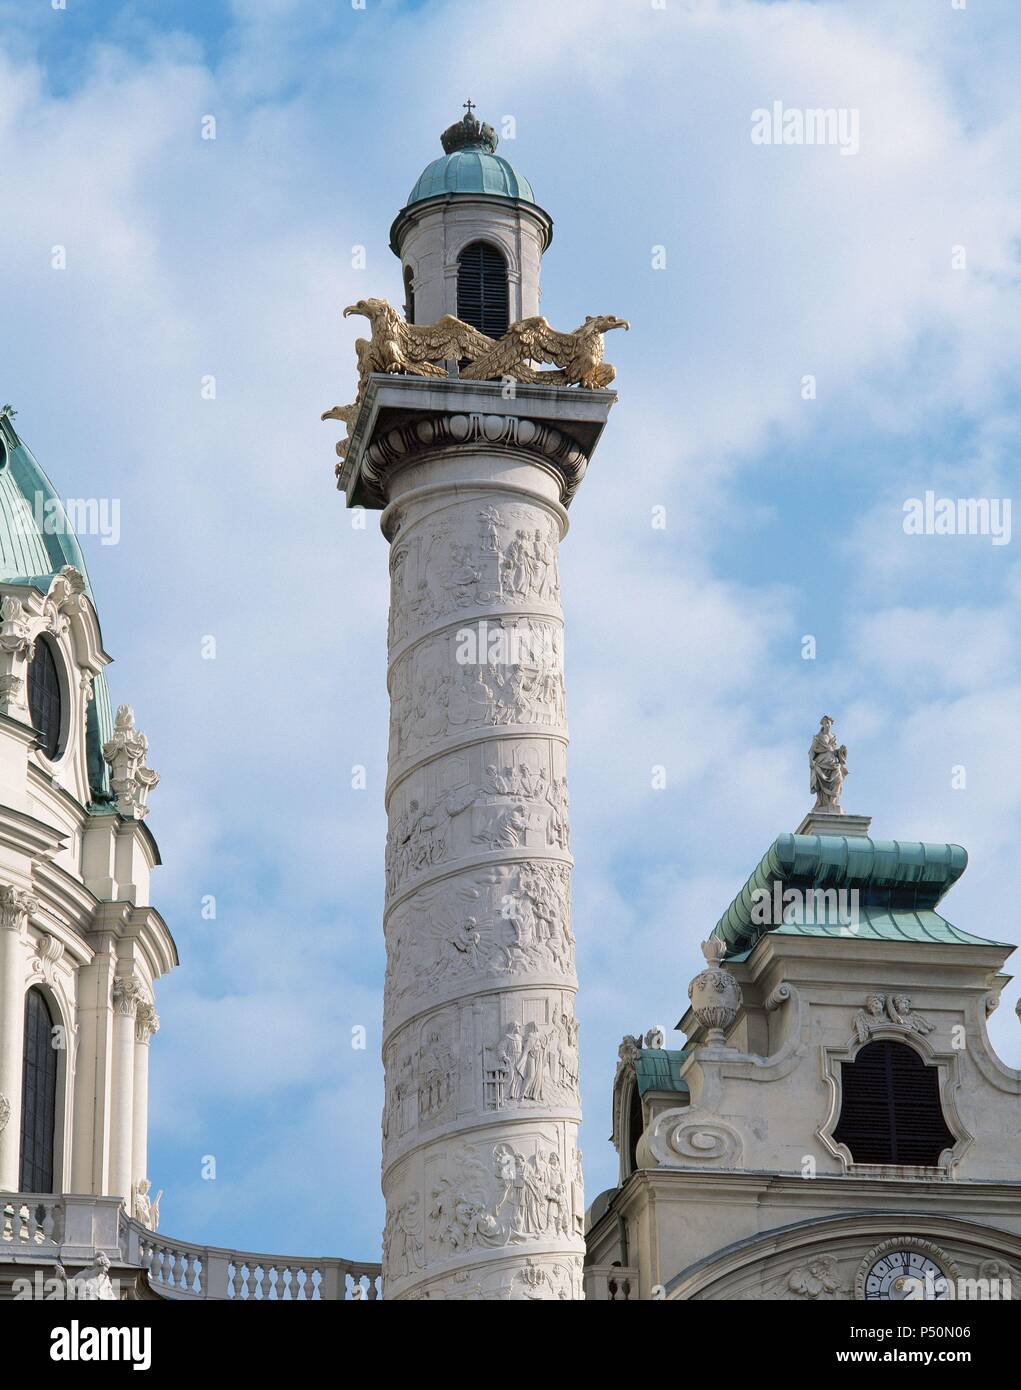 Baroque Art. Karlskirche or Church of St. Charles Borromeo (1716-1737). Column on the right side of the church, decorated with spirals and depicting scenes from the life of St. Charles Borromeo. Vienna. Austria. Stock Photo